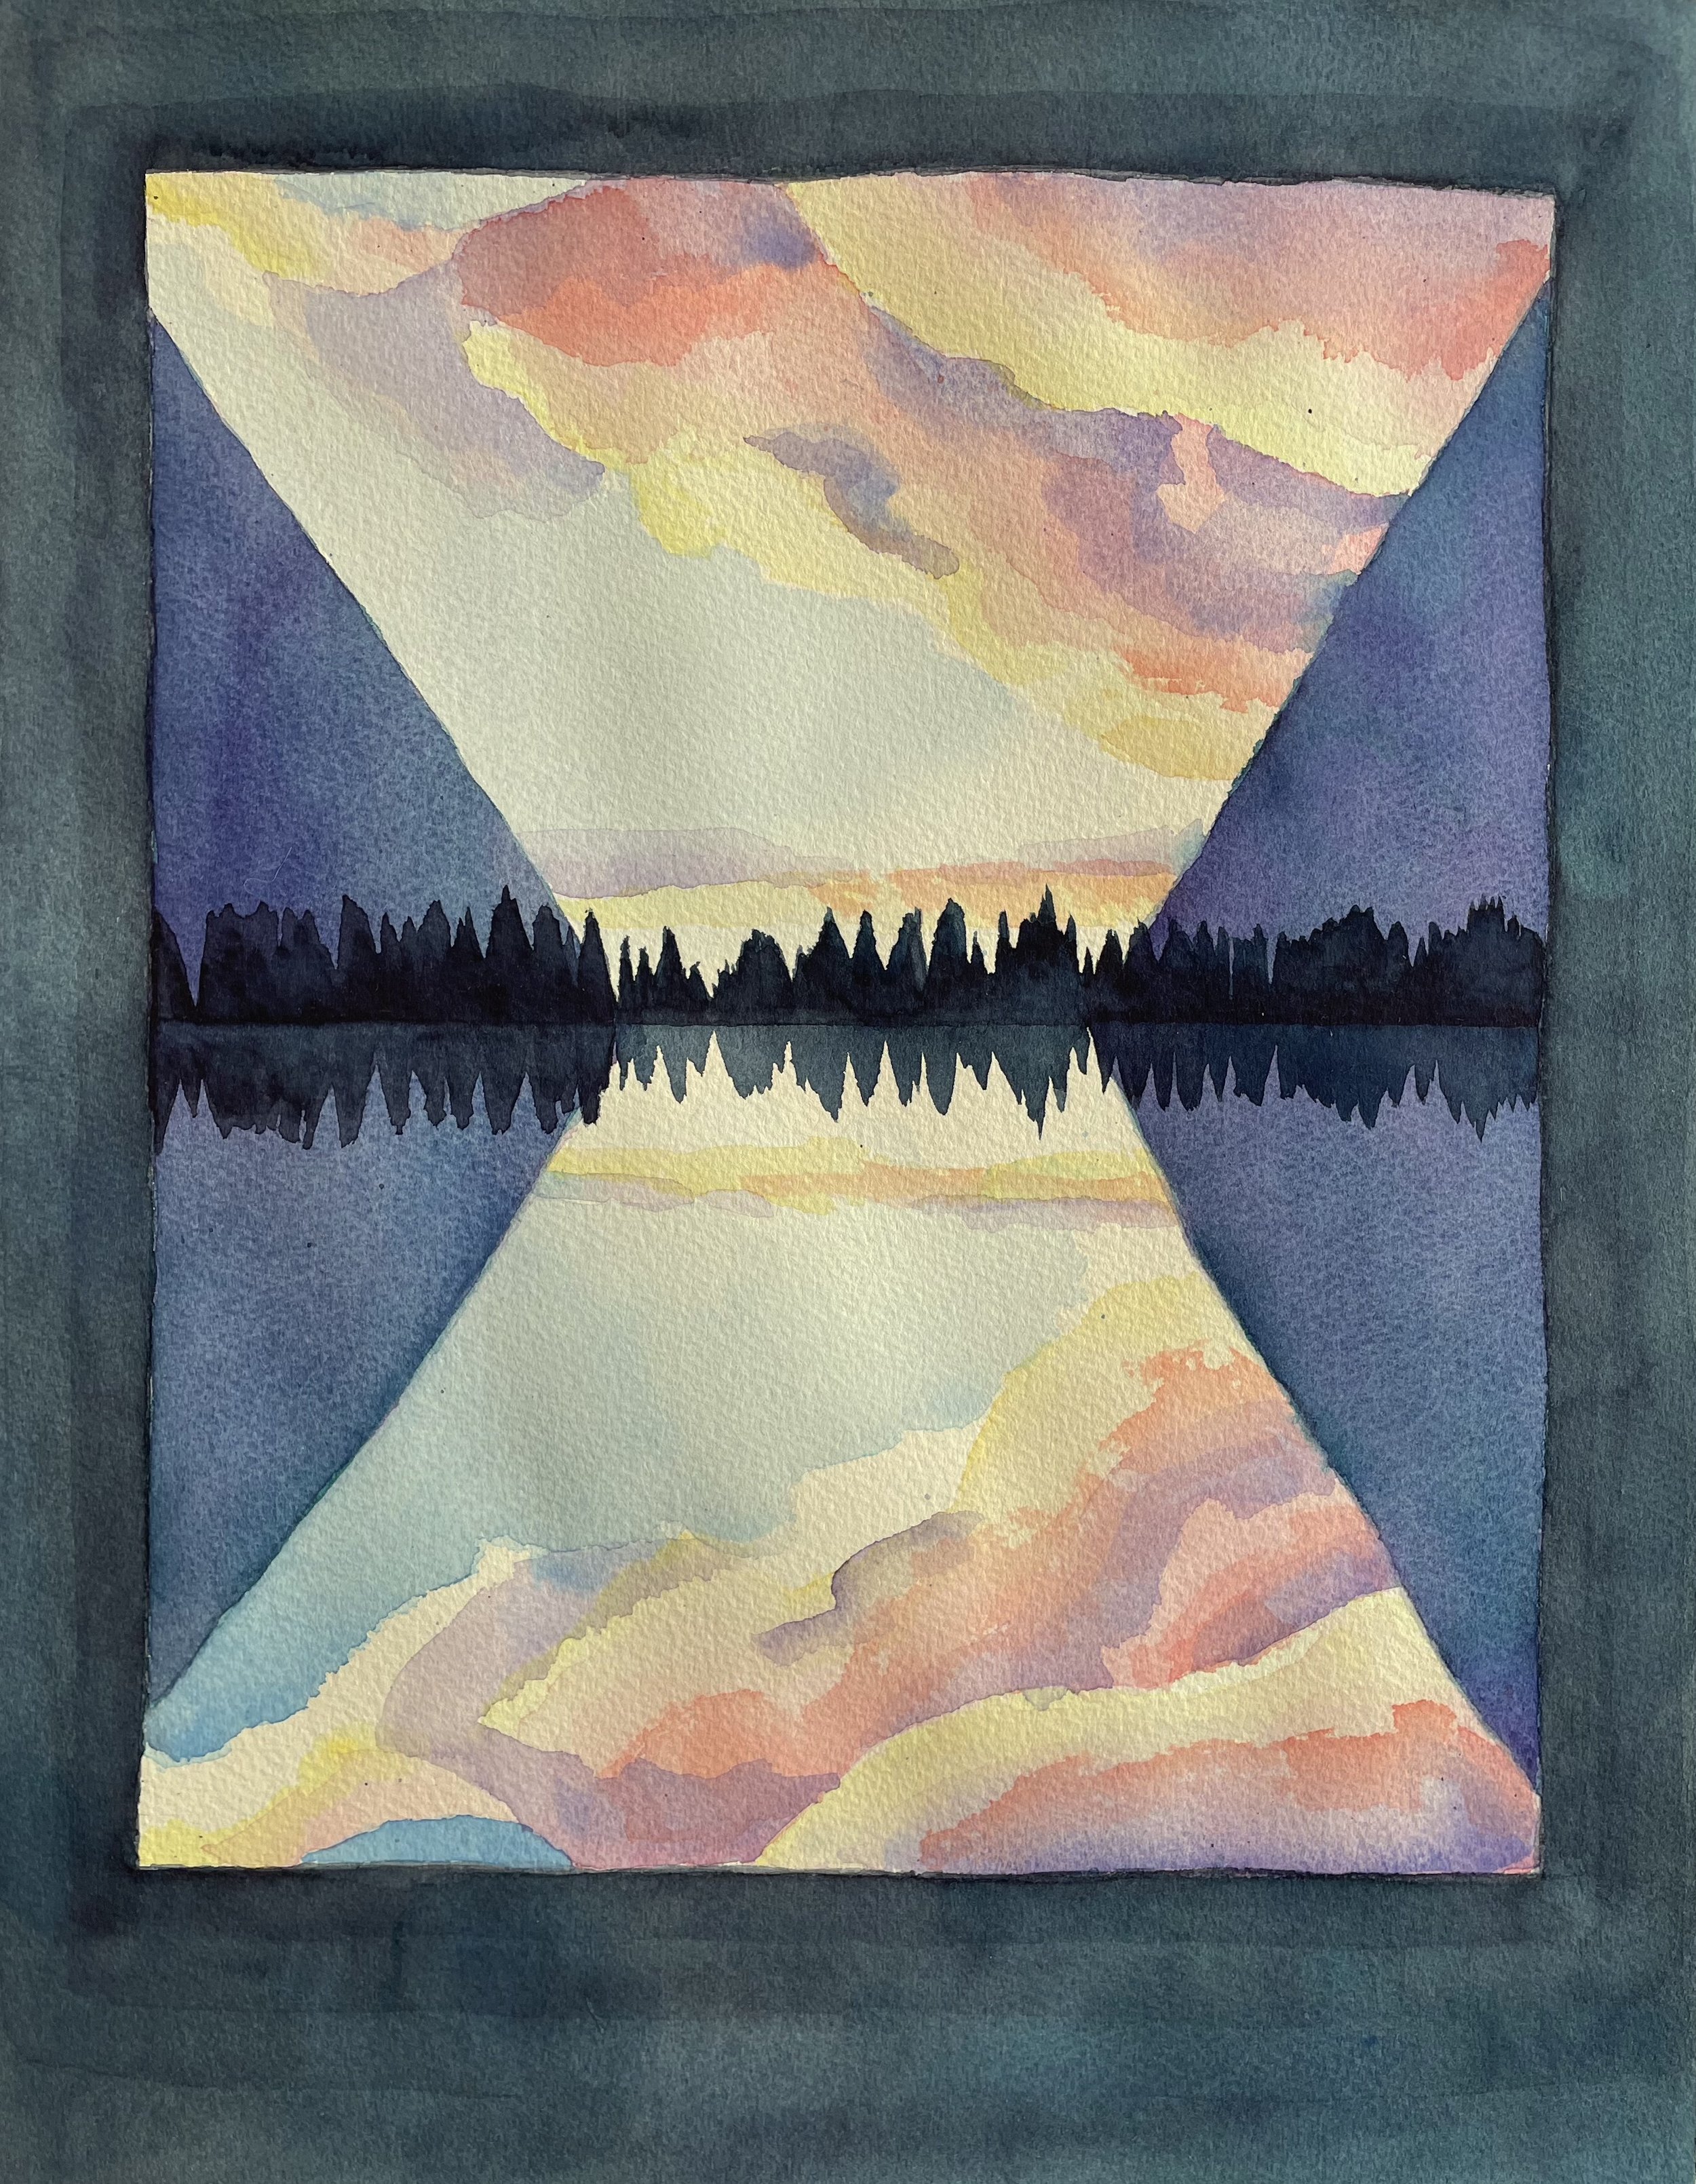 16 x 12 inches, Watercolor, 2021